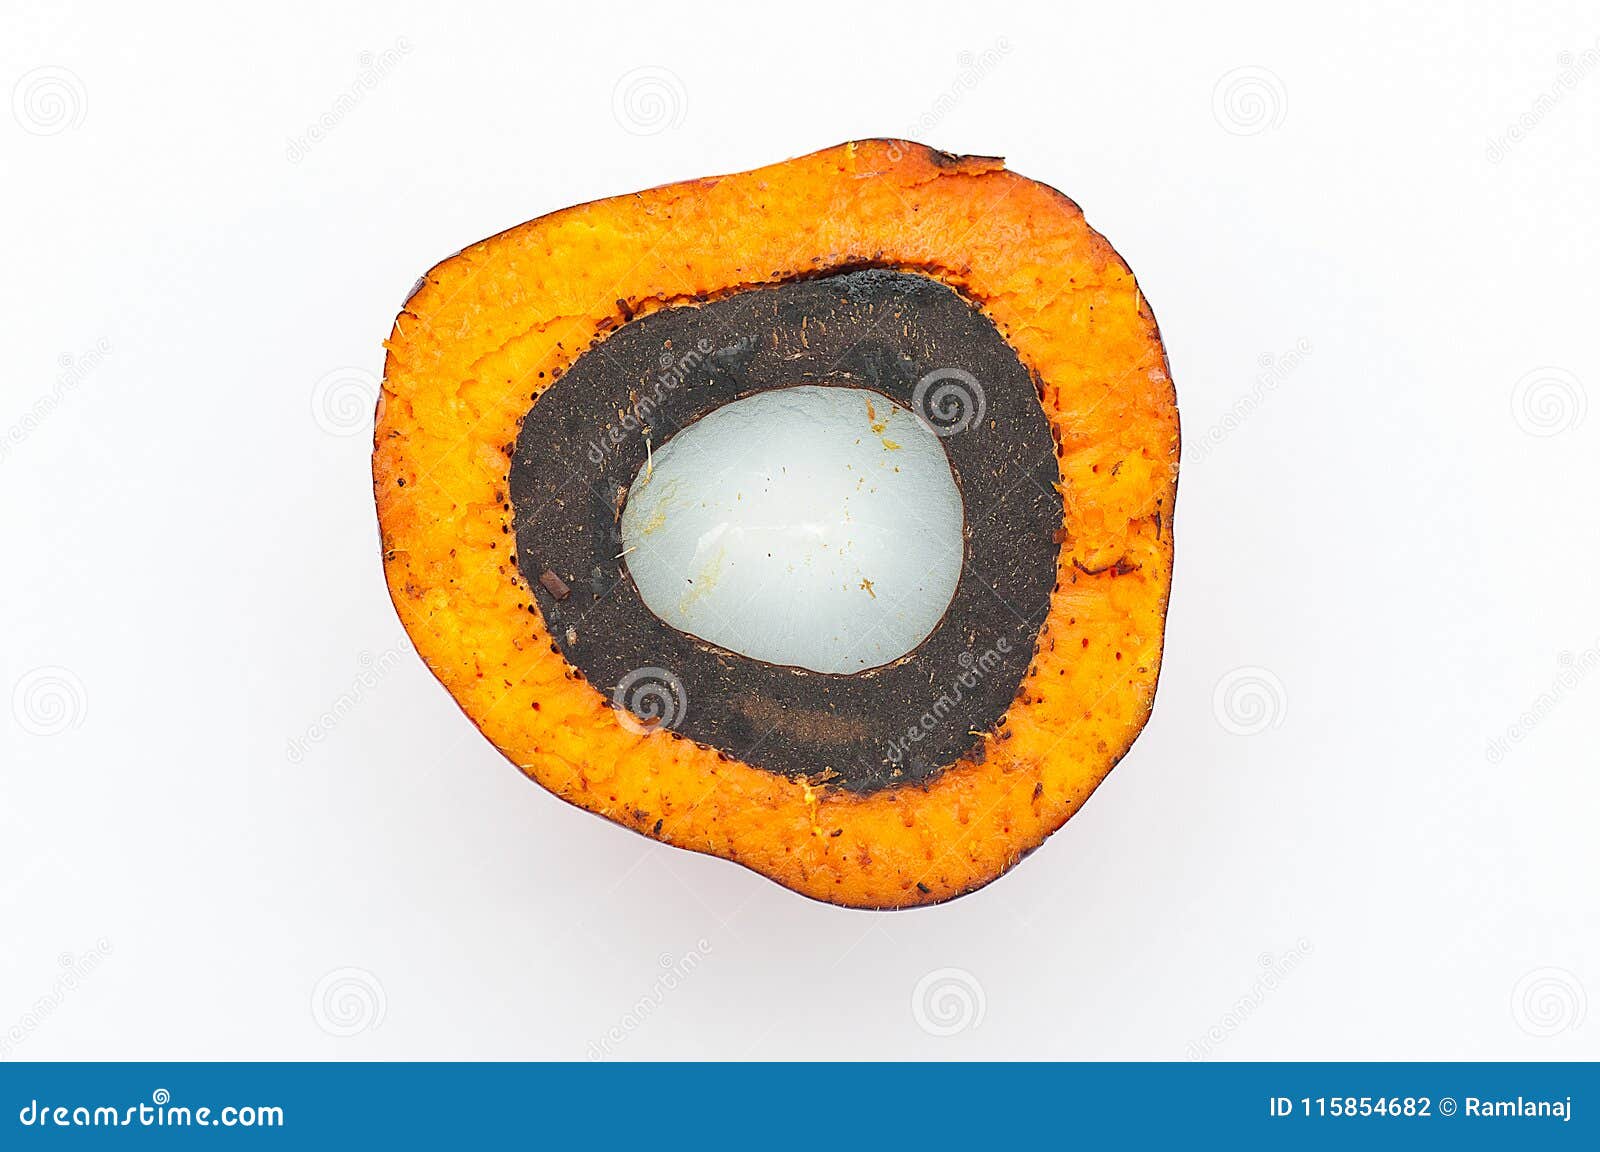 close up of cross section of palm oil dura fruits